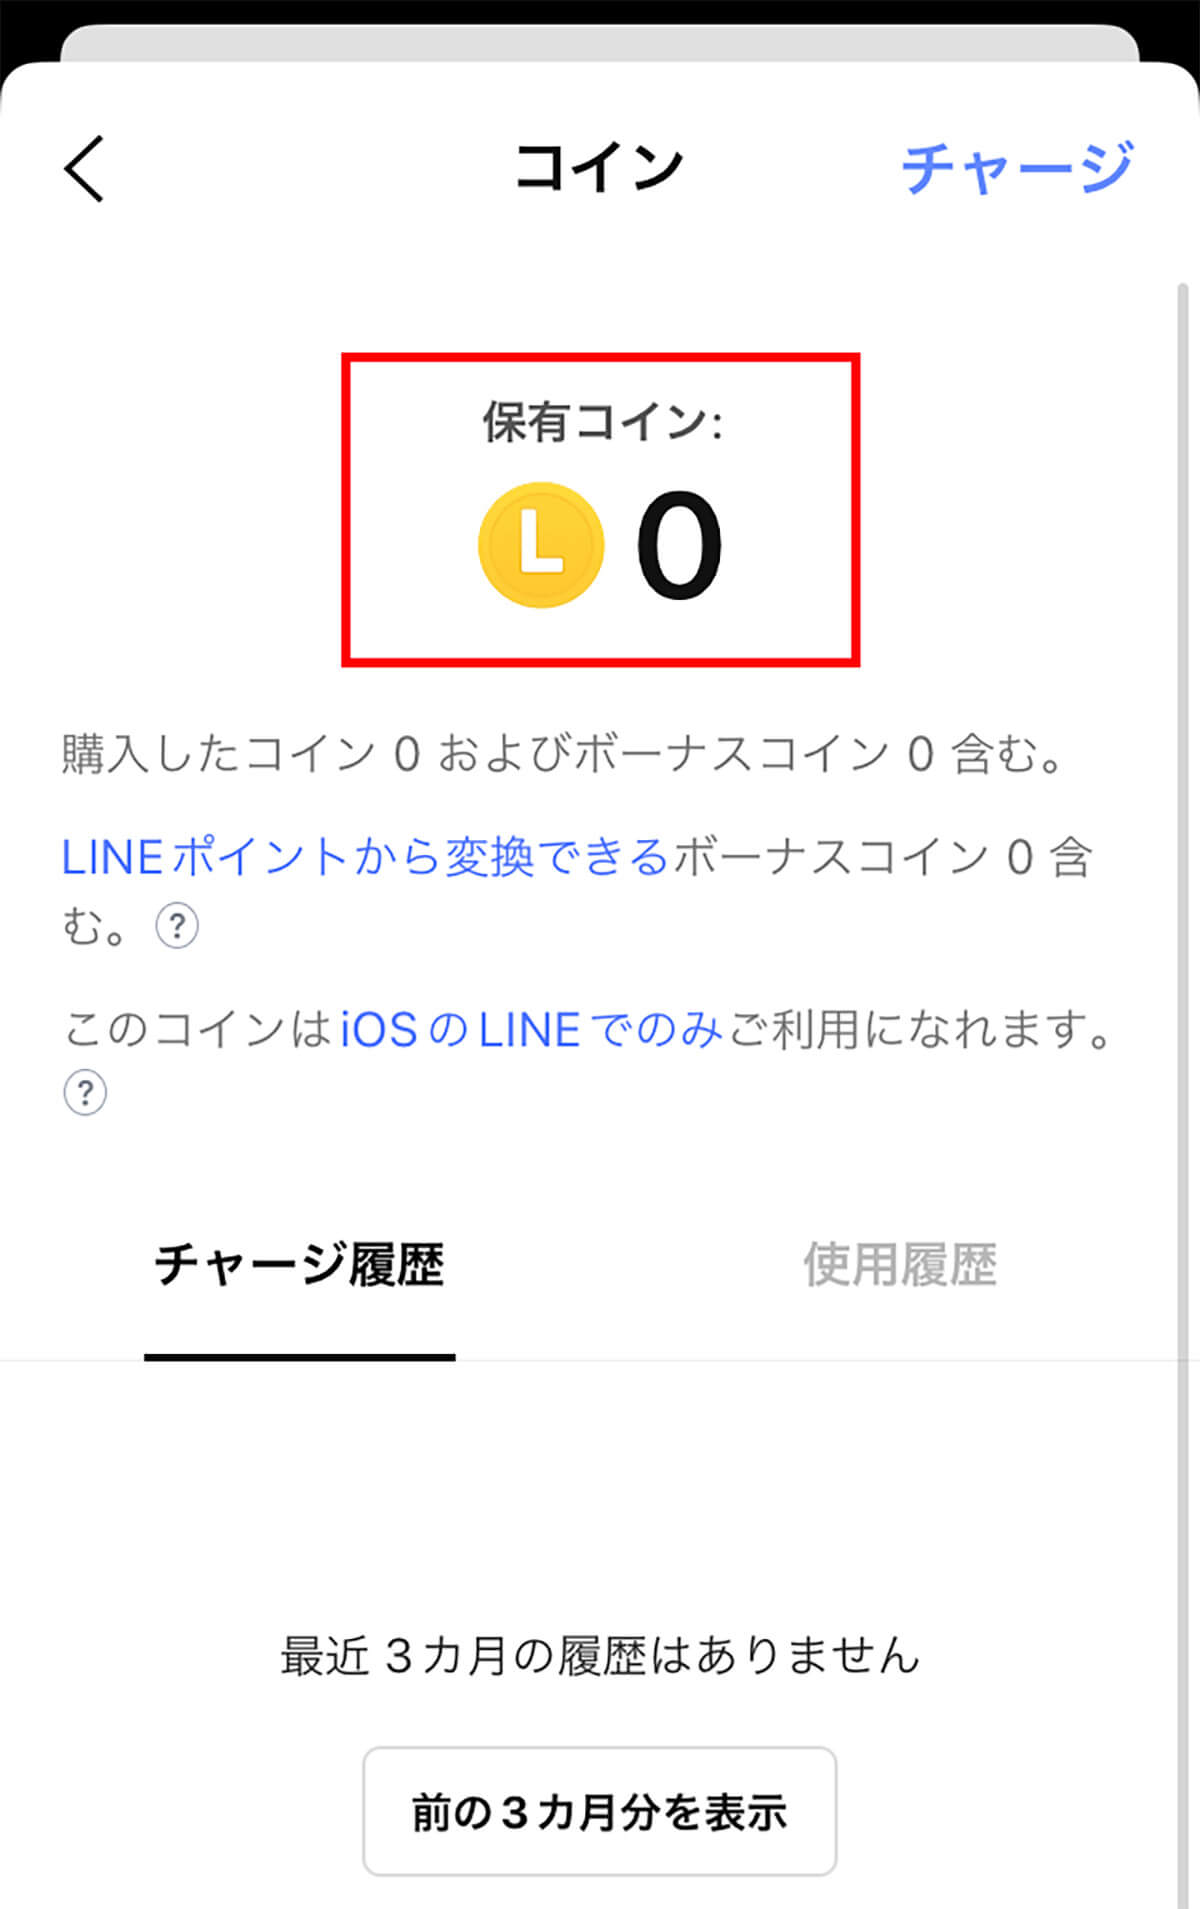 LINEコインの確認方法3